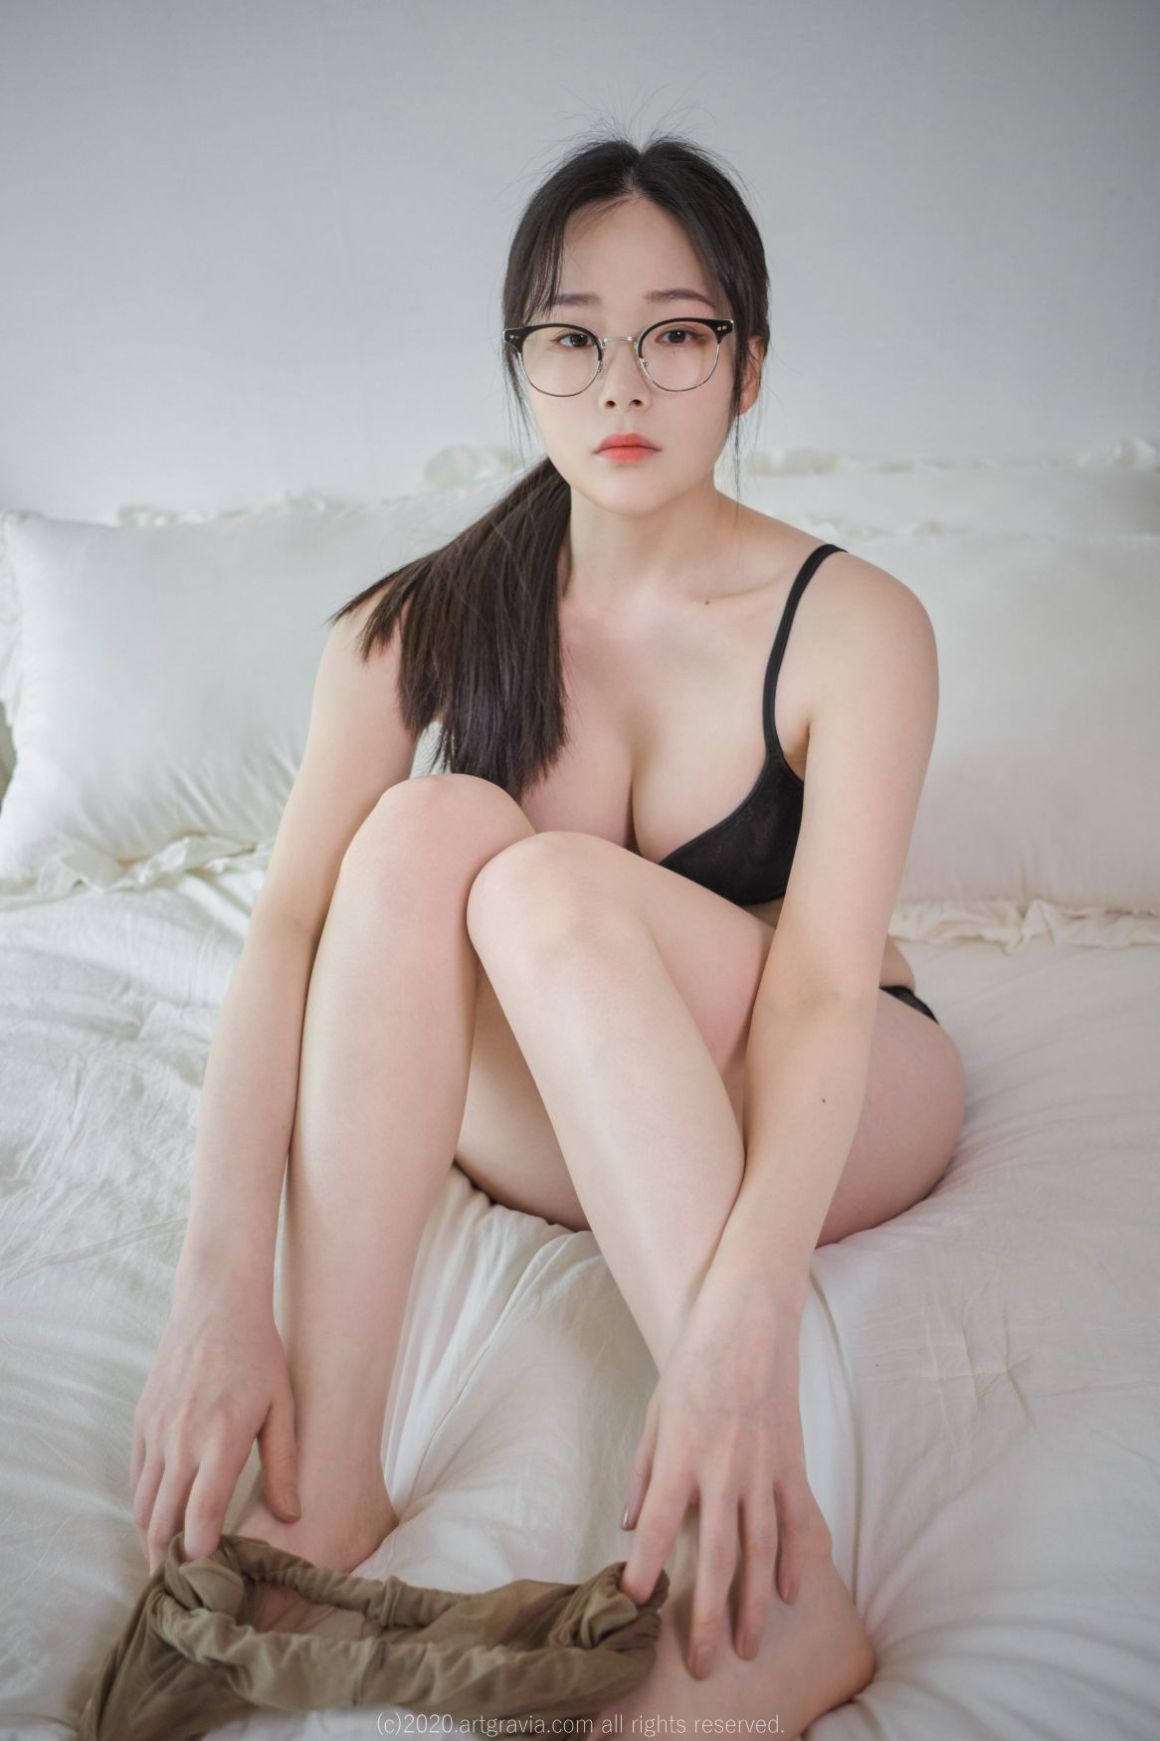 AsianOnlyfans.com 44 137 20211005